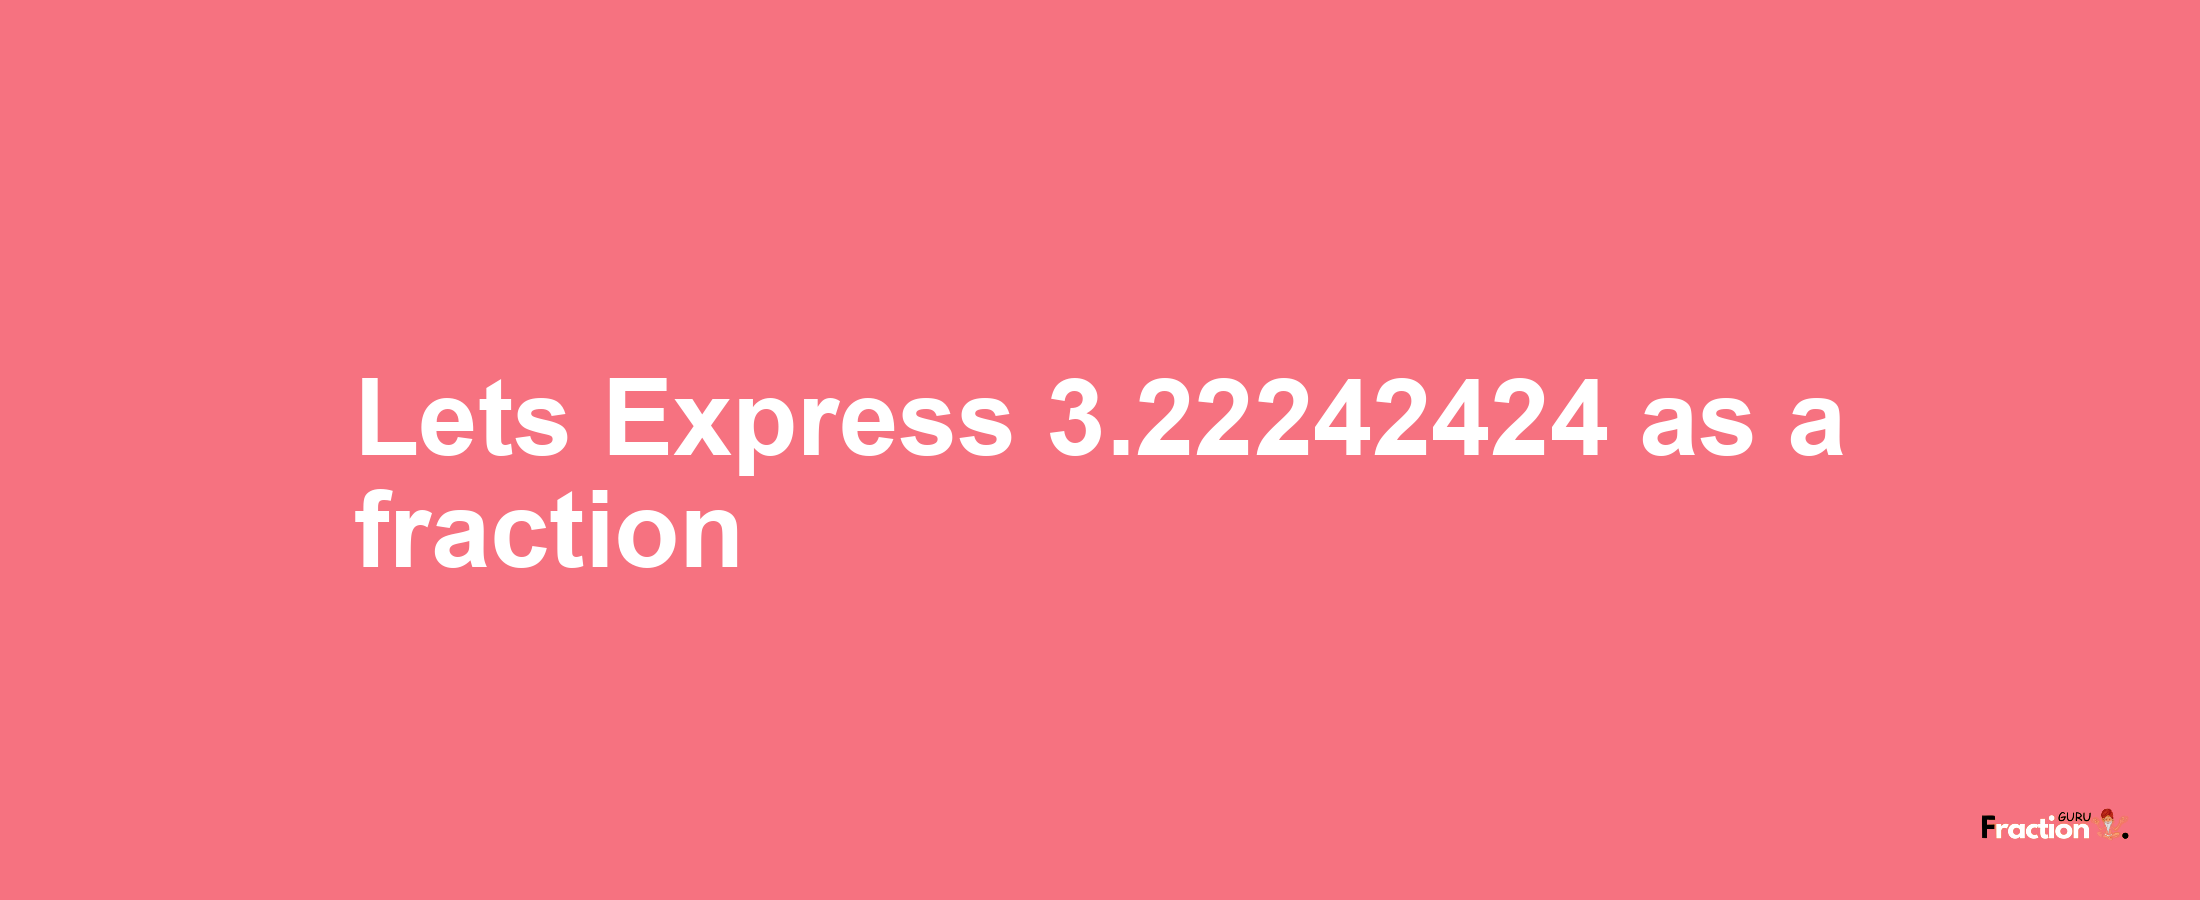 Lets Express 3.22242424 as afraction